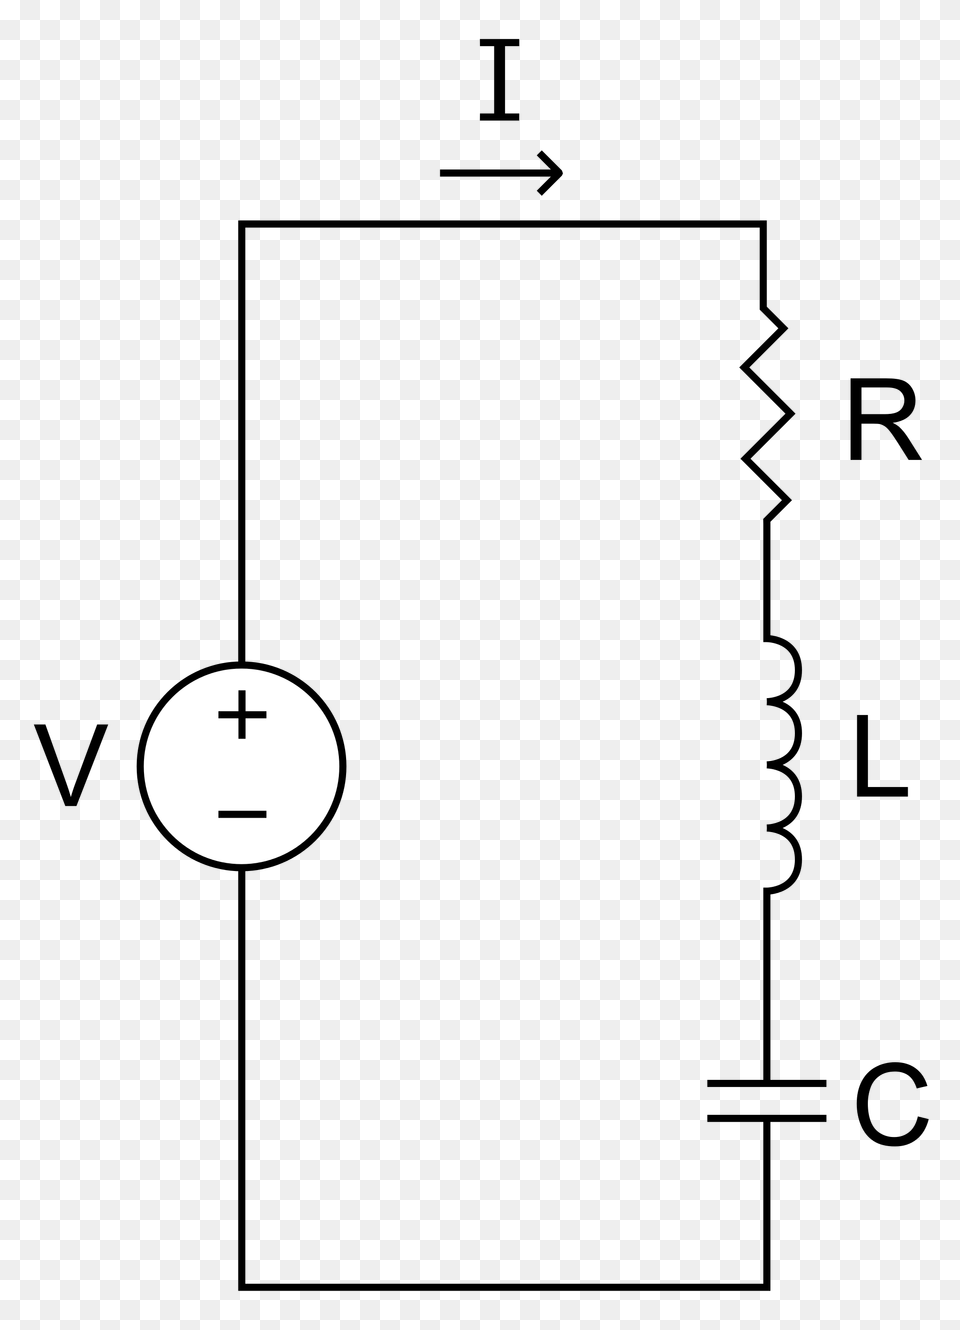 Rlc Series Circuit, Outdoors Png Image